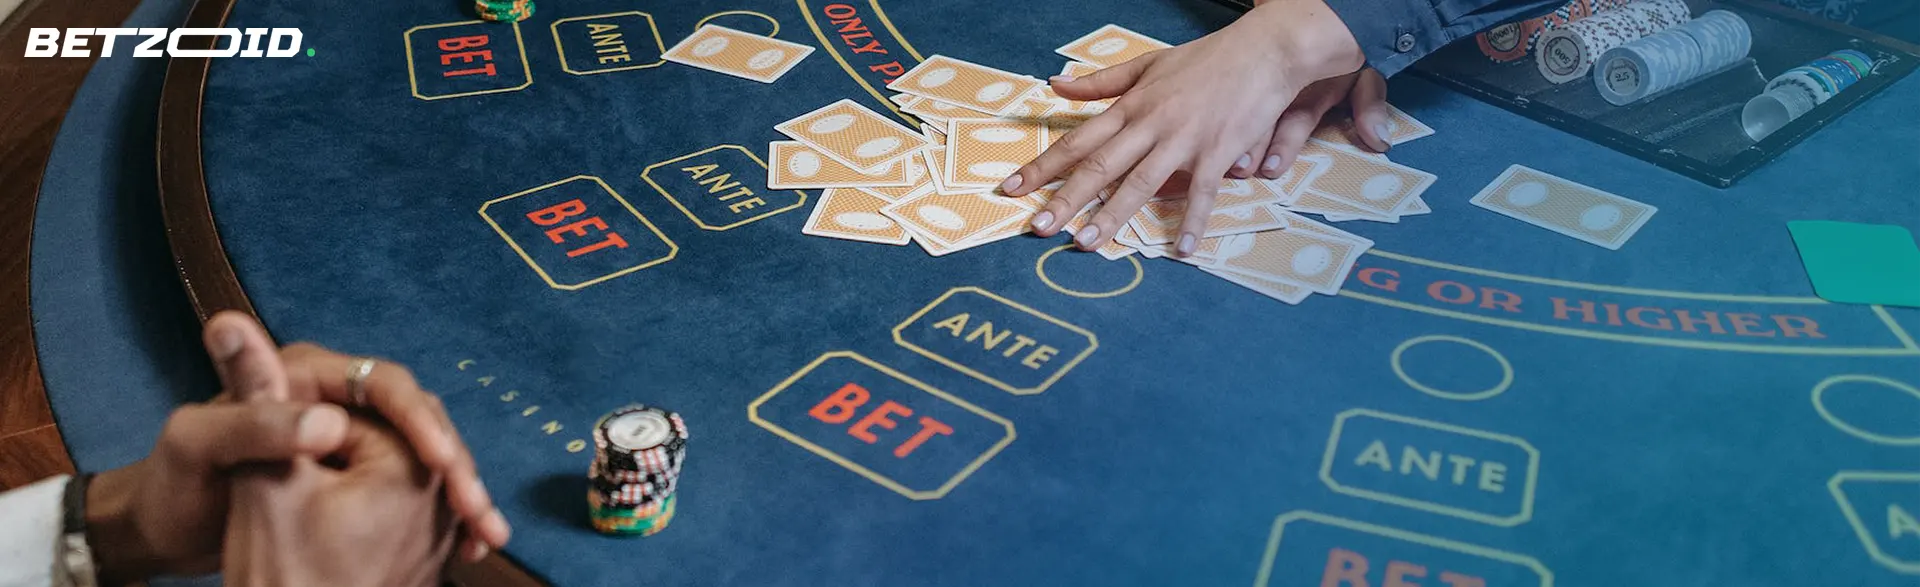 A hand of cards and a colorful assortment of casino chips on a table represent the latest online casinos.